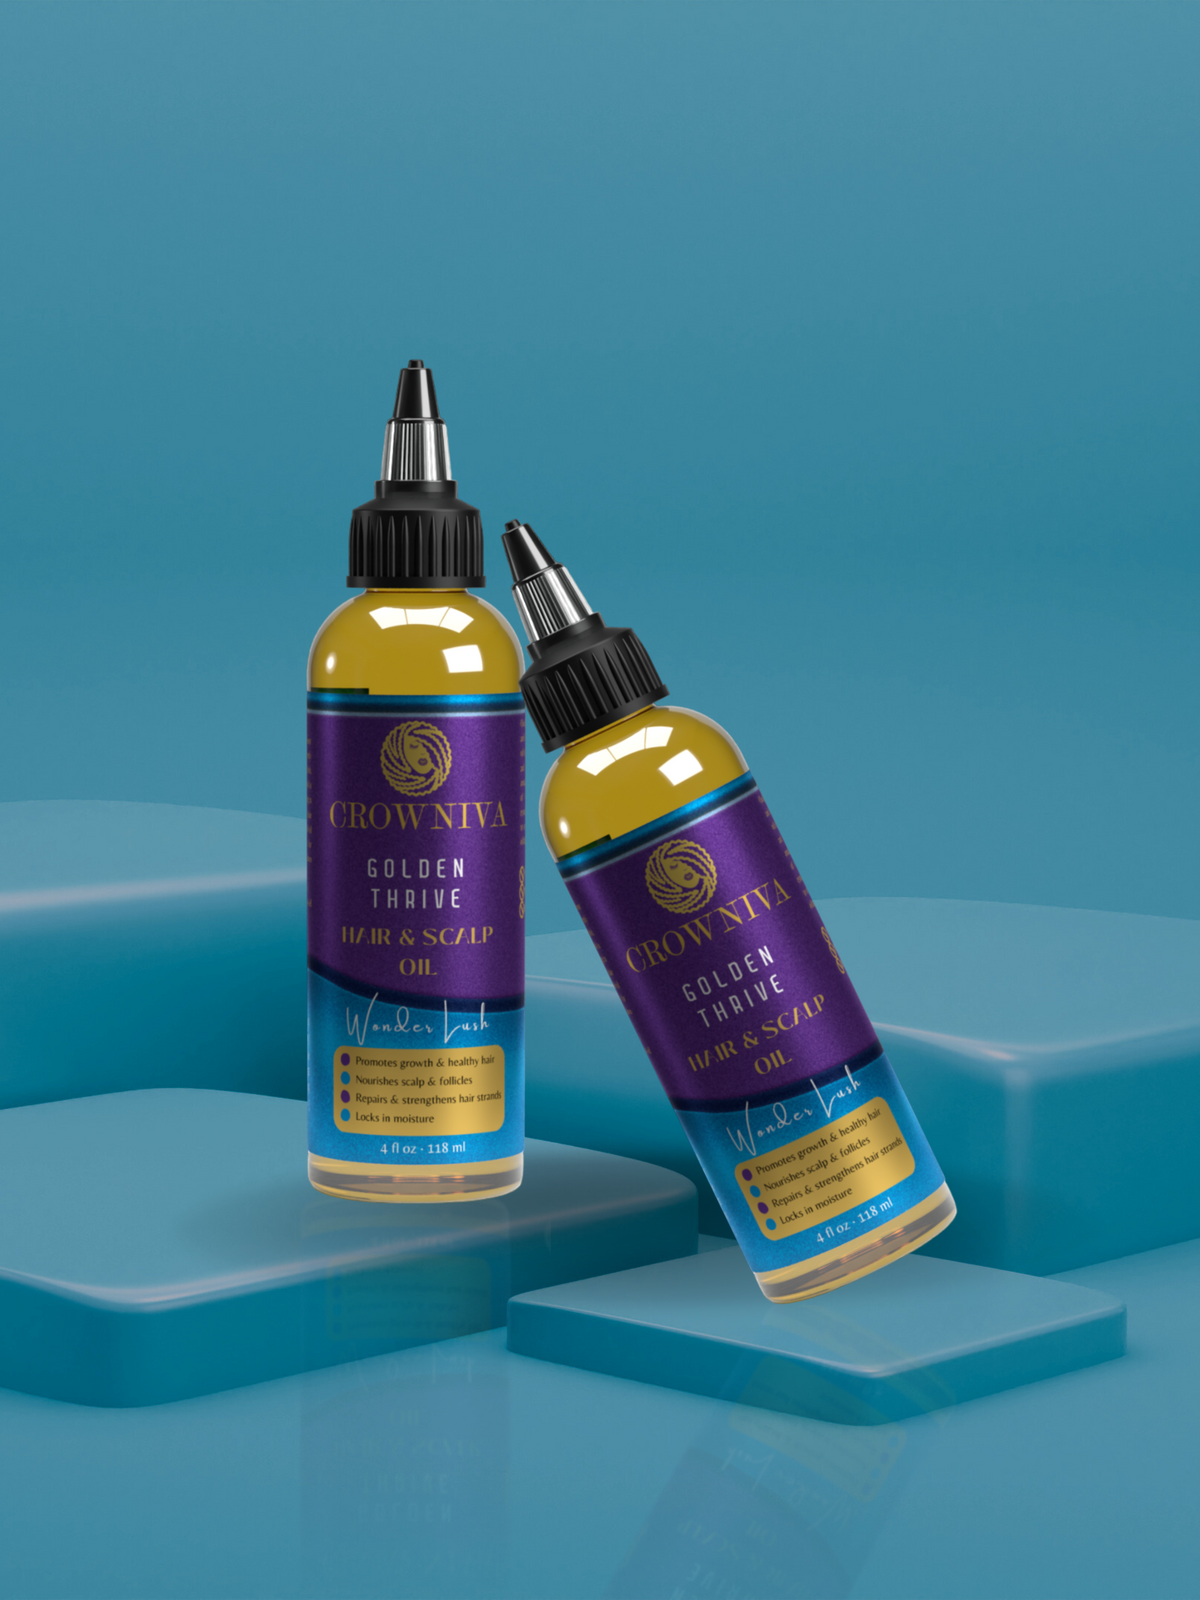 Twice as Nice Golden Thrive Hair and Scalp Oil Set of 2